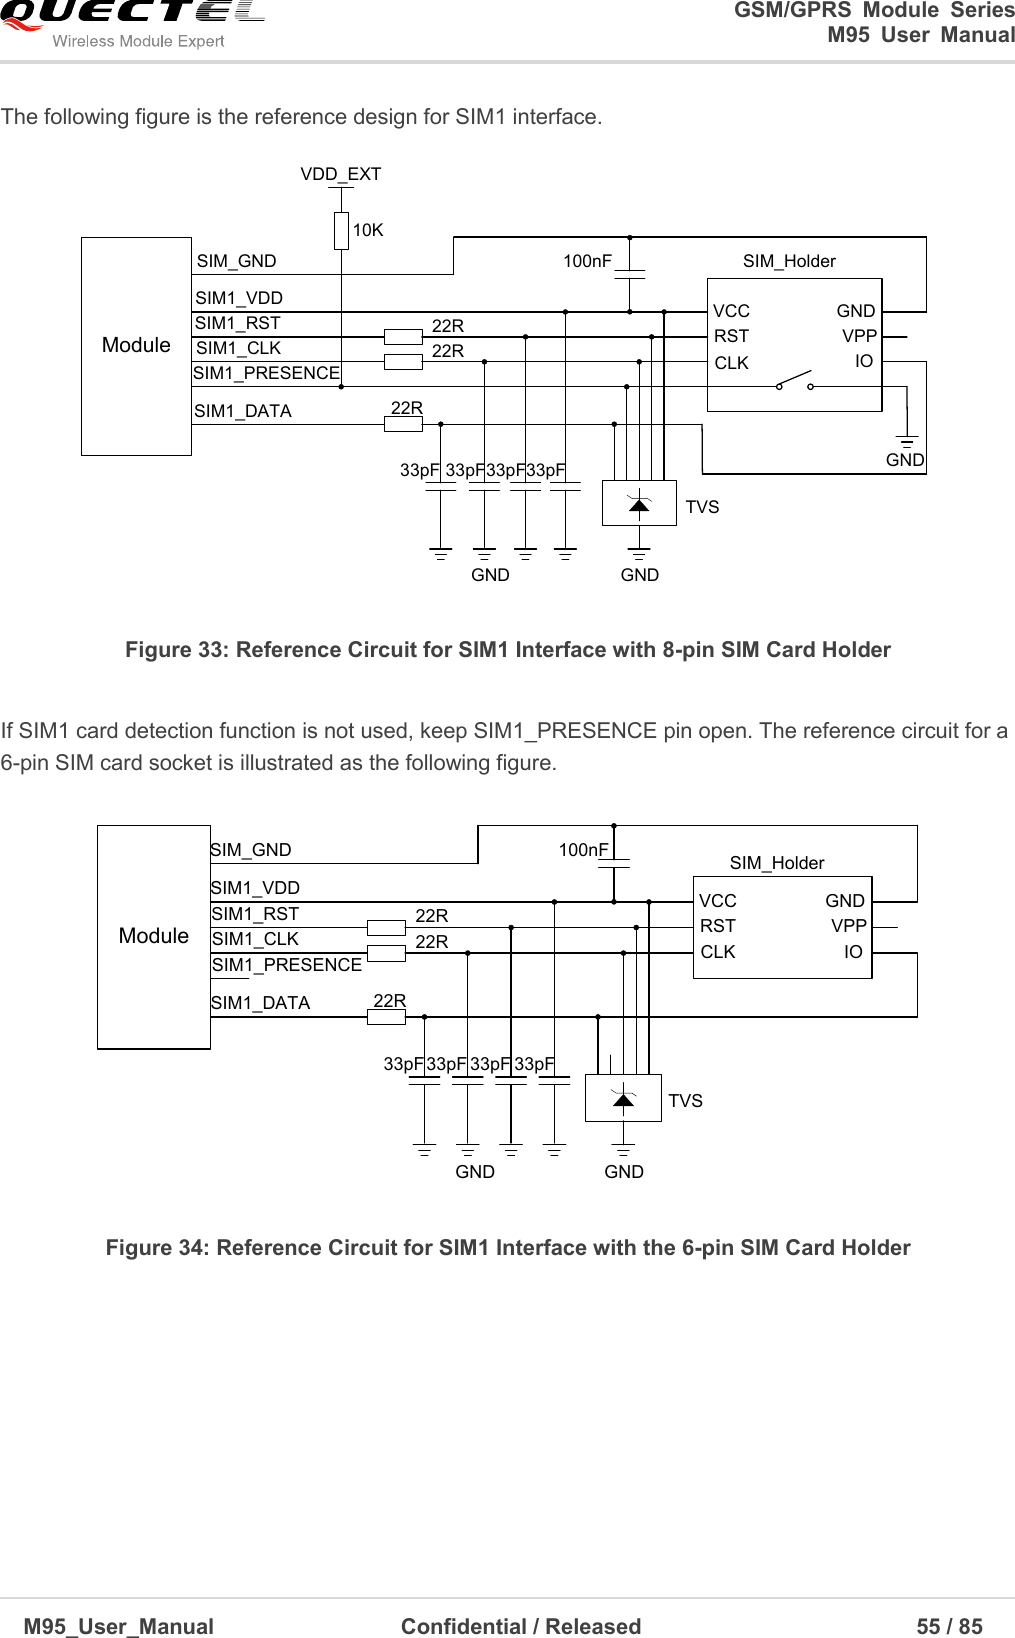                                                                              GSM/GPRS  Module  Series                                                                 M95  User  Manual  M95_User_Manual                                  Confidential / Released                             55 / 85    The following figure is the reference design for SIM1 interface. VDD_EXTModuleSIM1_VDDSIM_GNDSIM1_RSTSIM1_CLKSIM1_DATASIM1_PRESENCE22R22R22R10K100nF SIM_HolderGNDGNDTVS33pF33pF 33pF33pFVCCRSTCLK IOVPPGNDGND Figure 33: Reference Circuit for SIM1 Interface with 8-pin SIM Card Holder  If SIM1 card detection function is not used, keep SIM1_PRESENCE pin open. The reference circuit for a 6-pin SIM card socket is illustrated as the following figure.  ModuleSIM1_VDDSIM_GNDSIM1_RSTSIM1_CLKSIM1_DATASIM1_PRESENCE22R22R22R100nF SIM_HolderGNDTVS33pF33pF 33pFVCCRSTCLK IOVPPGNDGND33pF Figure 34: Reference Circuit for SIM1 Interface with the 6-pin SIM Card Holder         